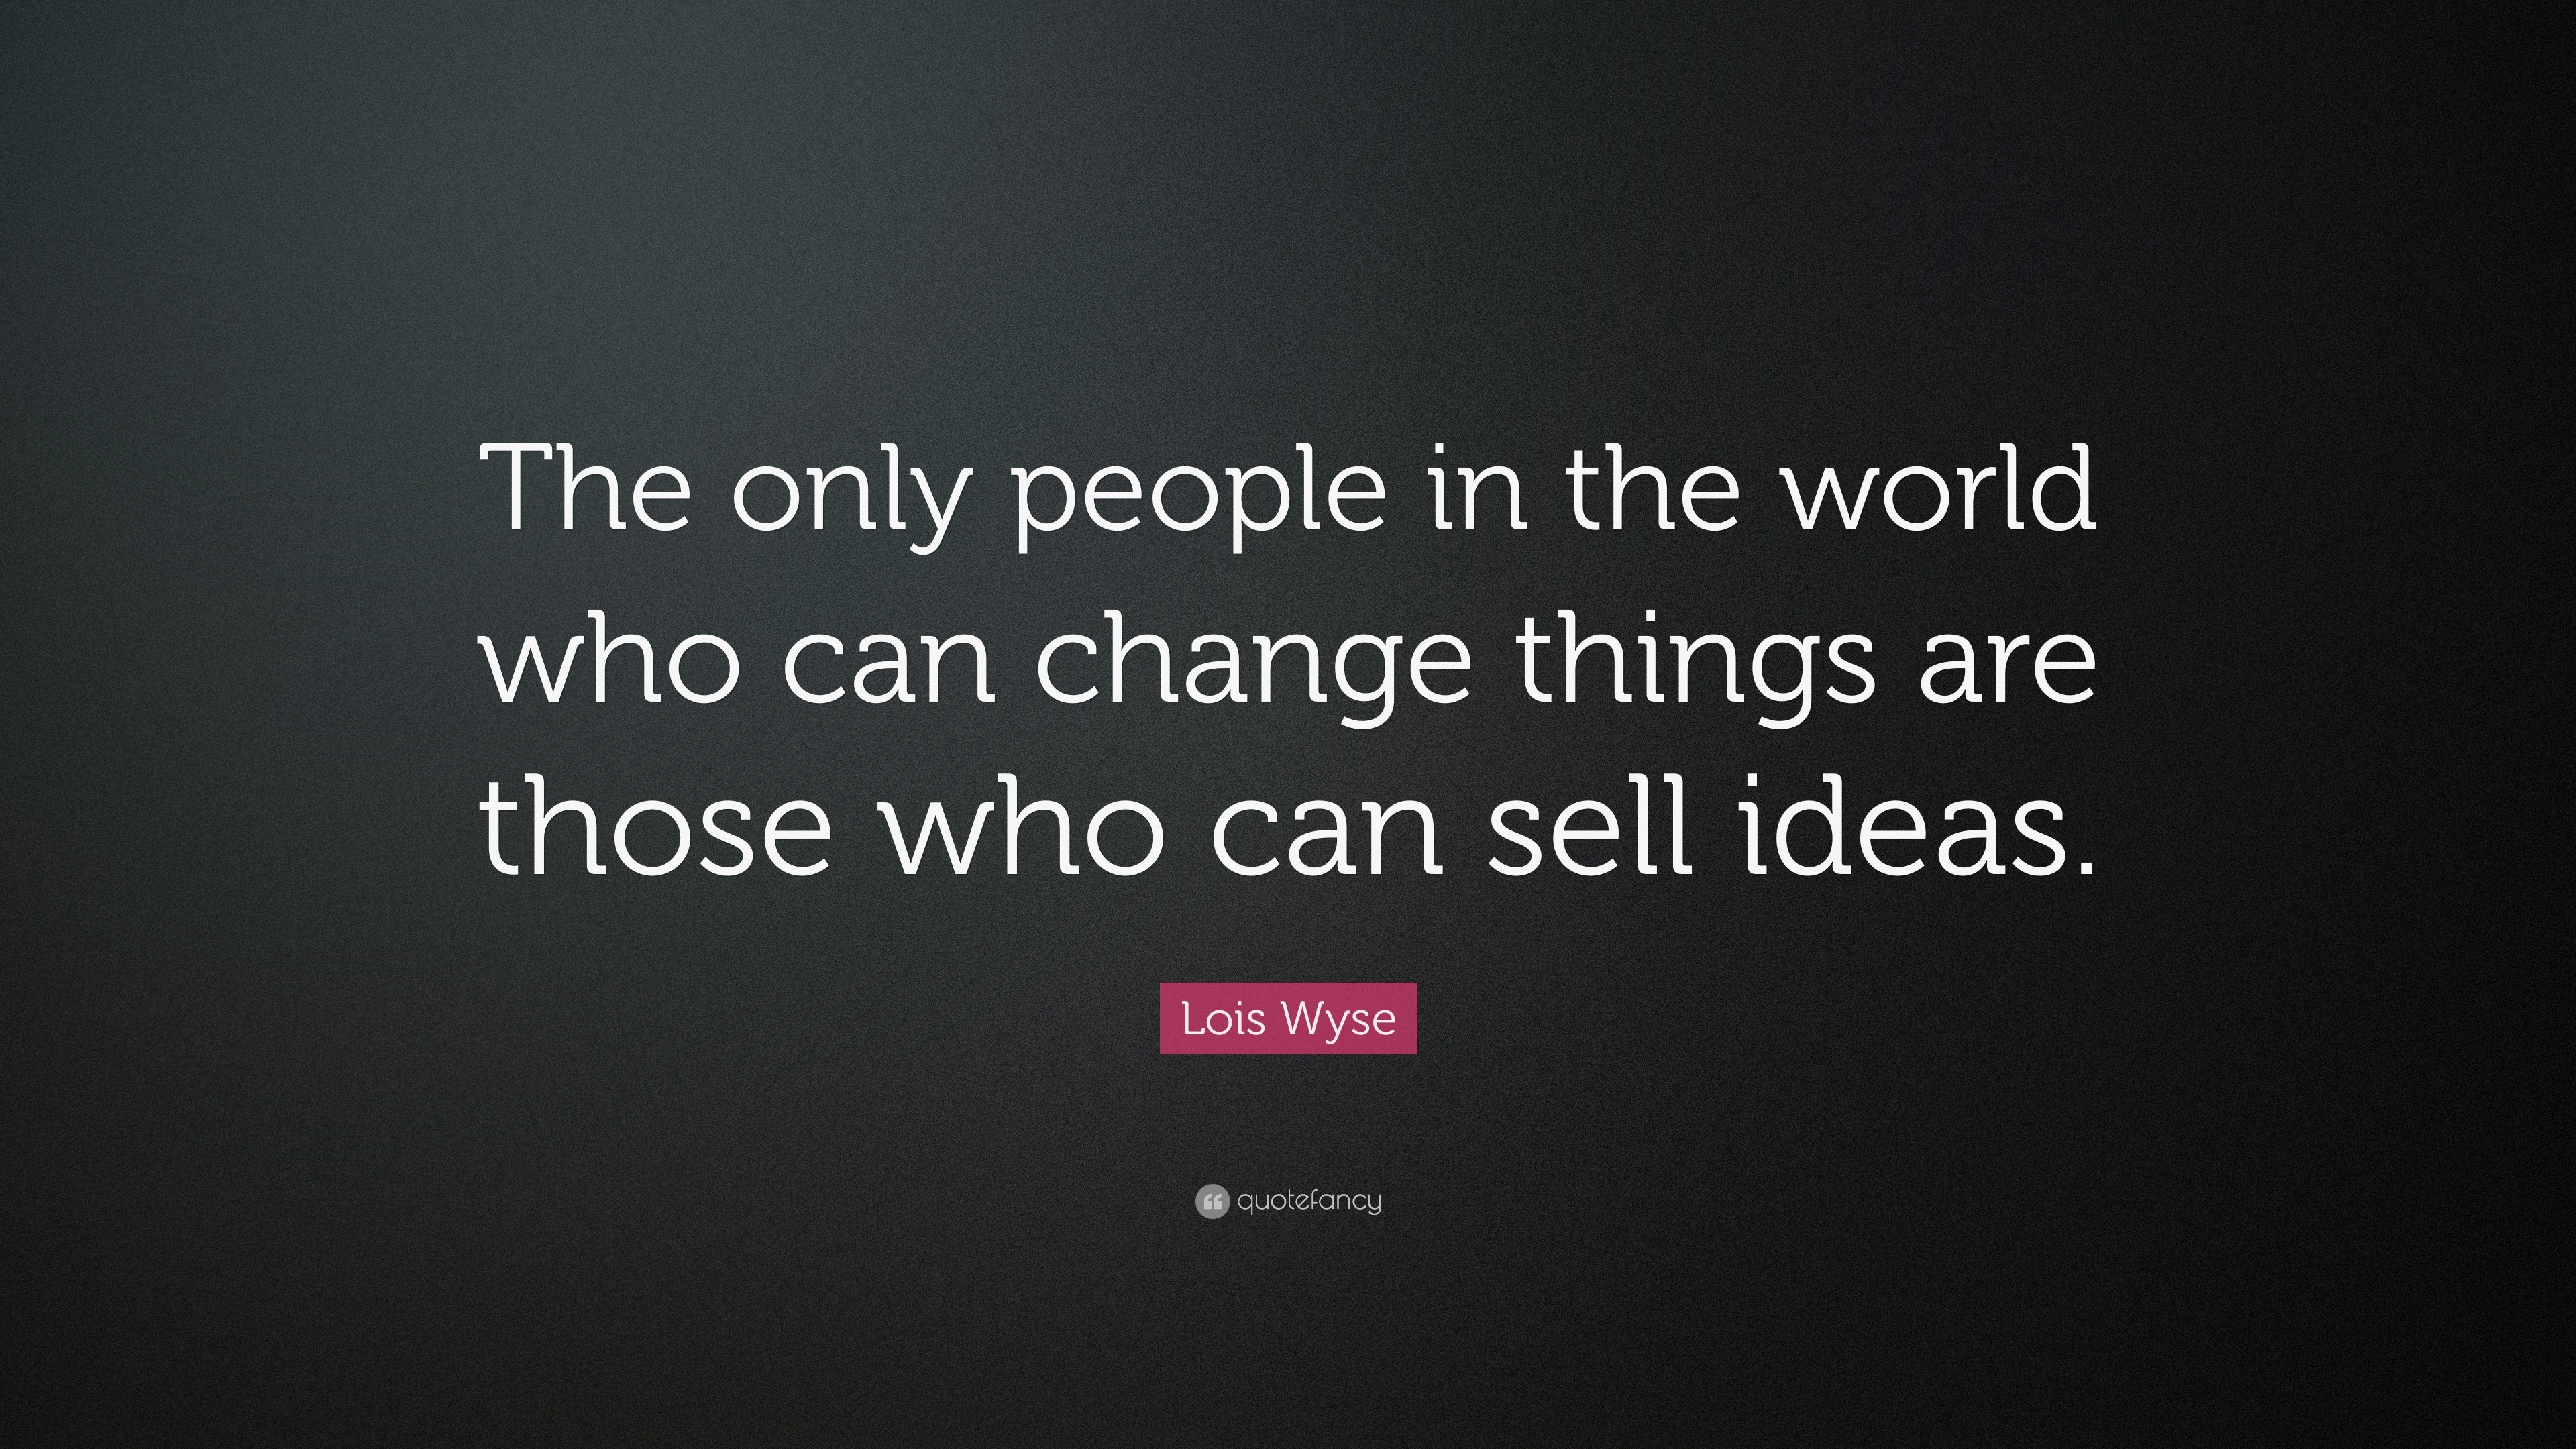 Lois Wyse Quote: “The only people in the world who can change things ...